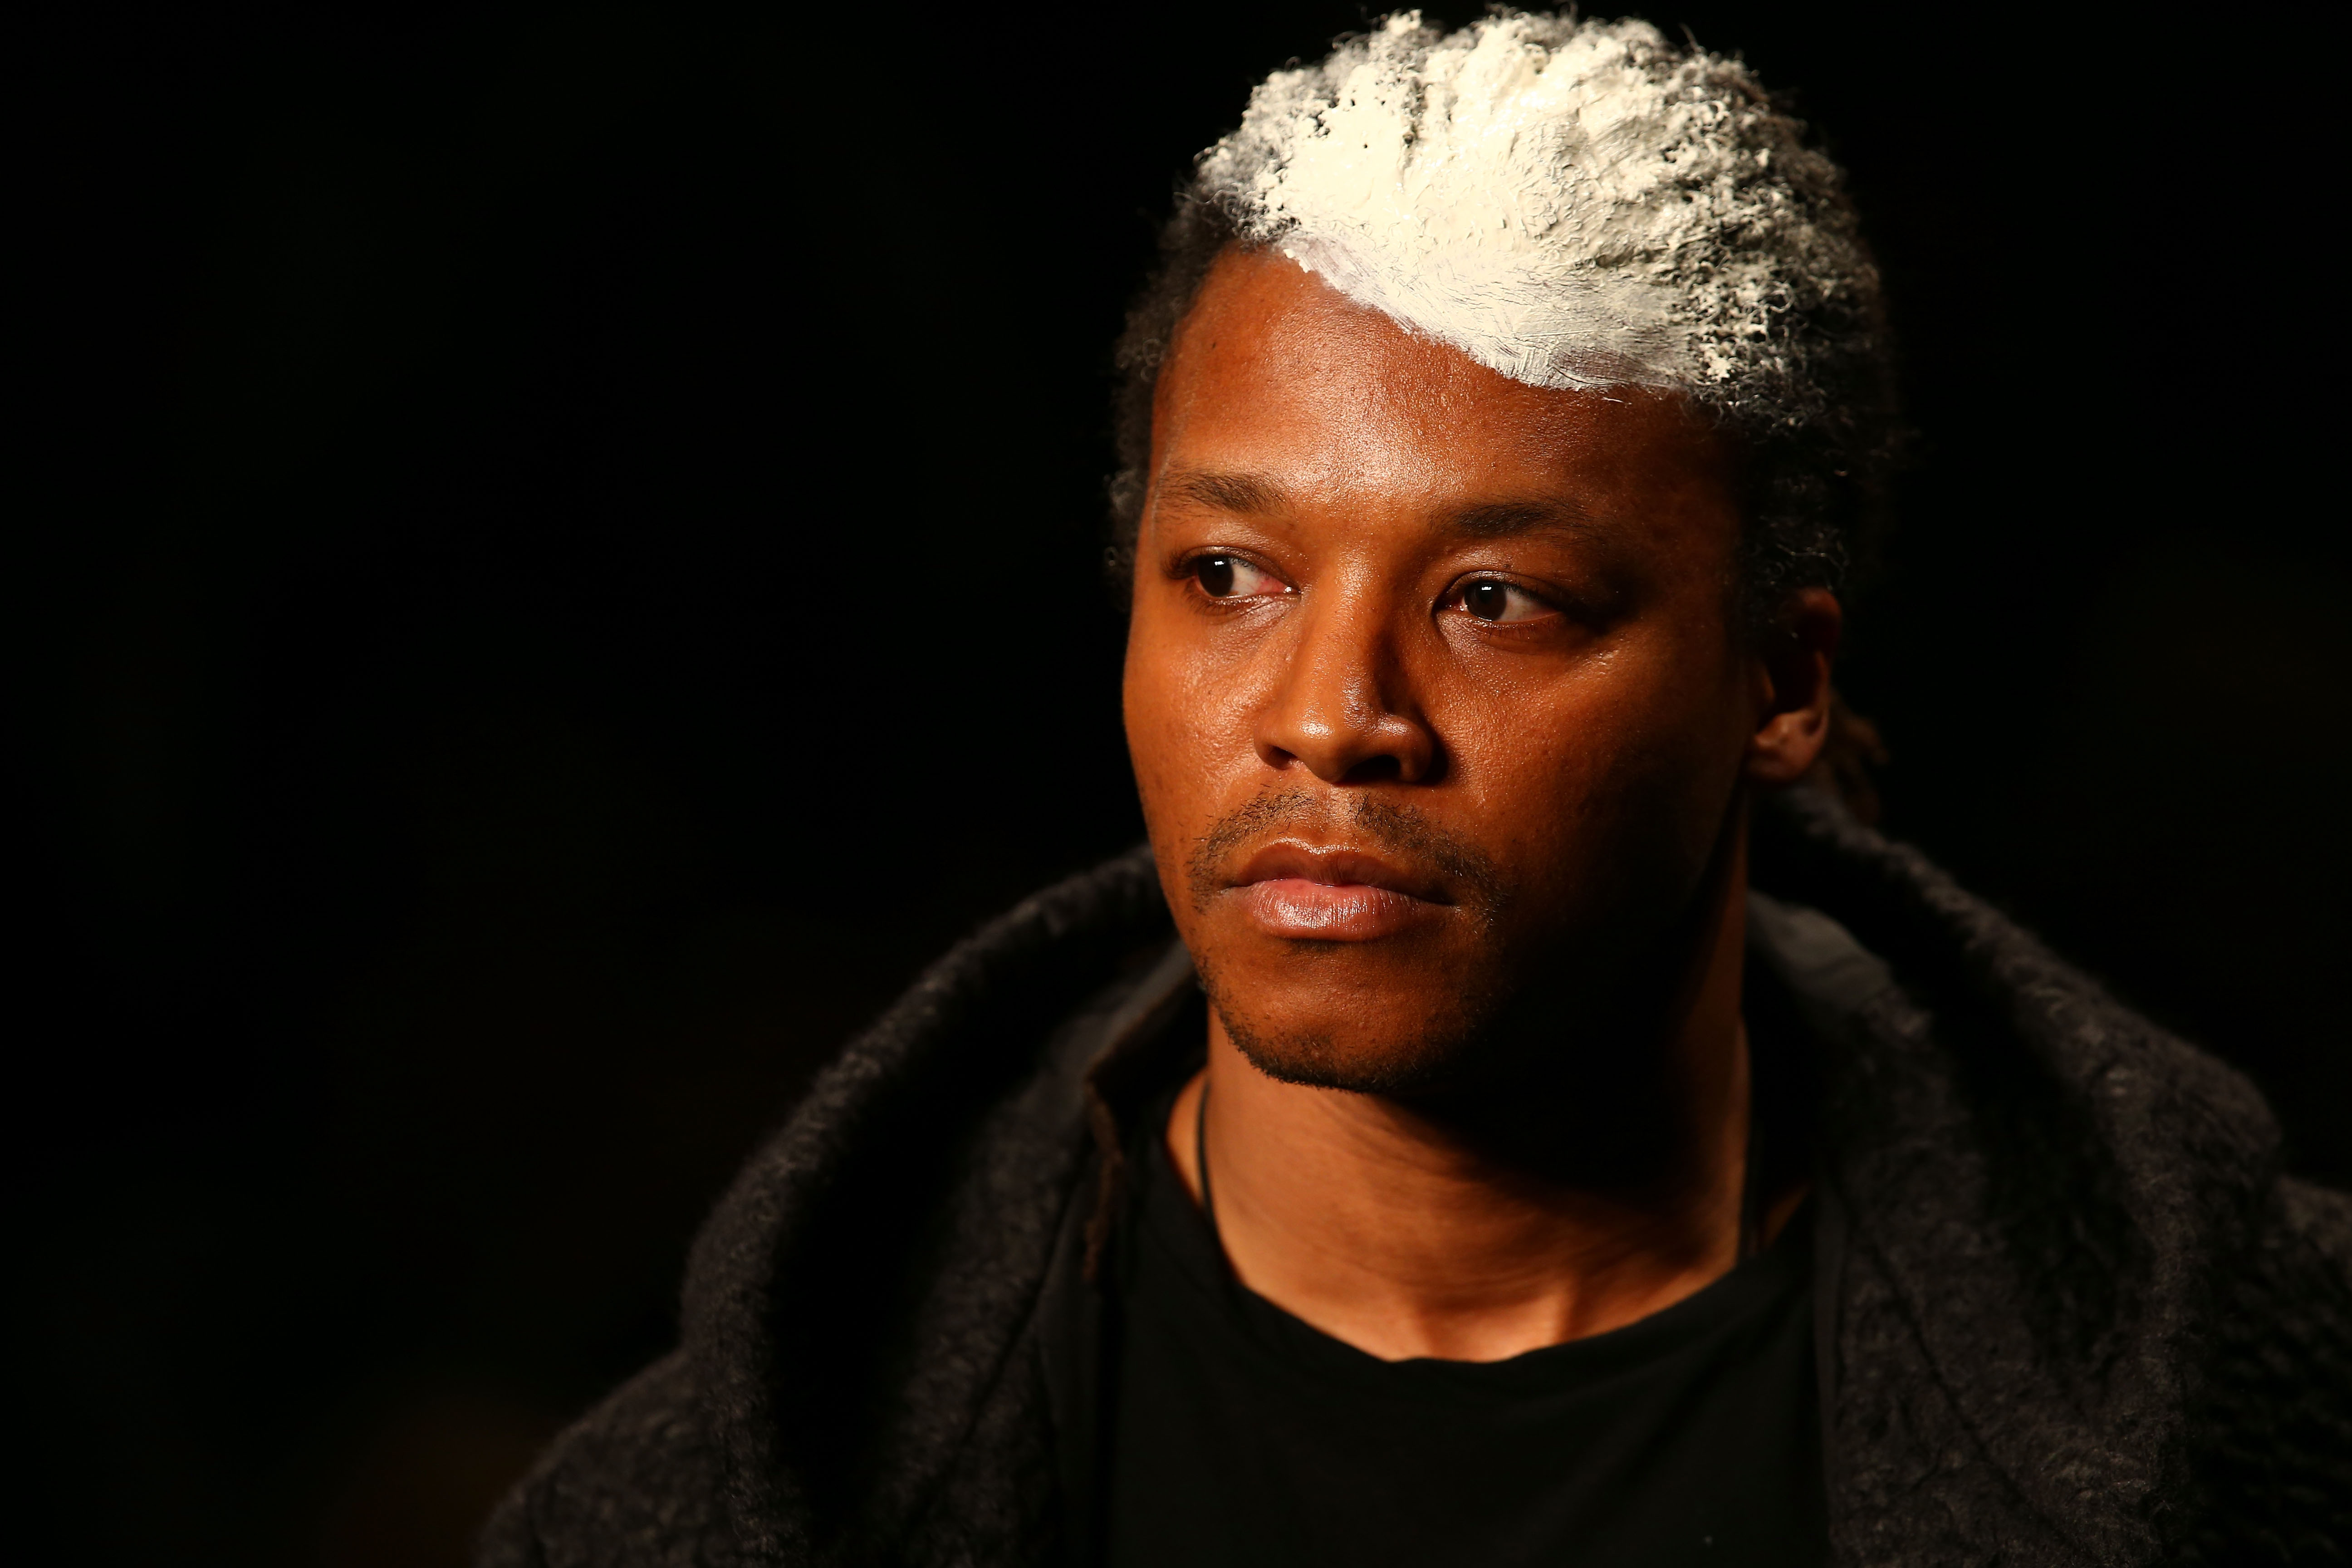 Lupe Fiasco Says Slavery Was A Choice, But In A Different Way To Kanye’s Statement